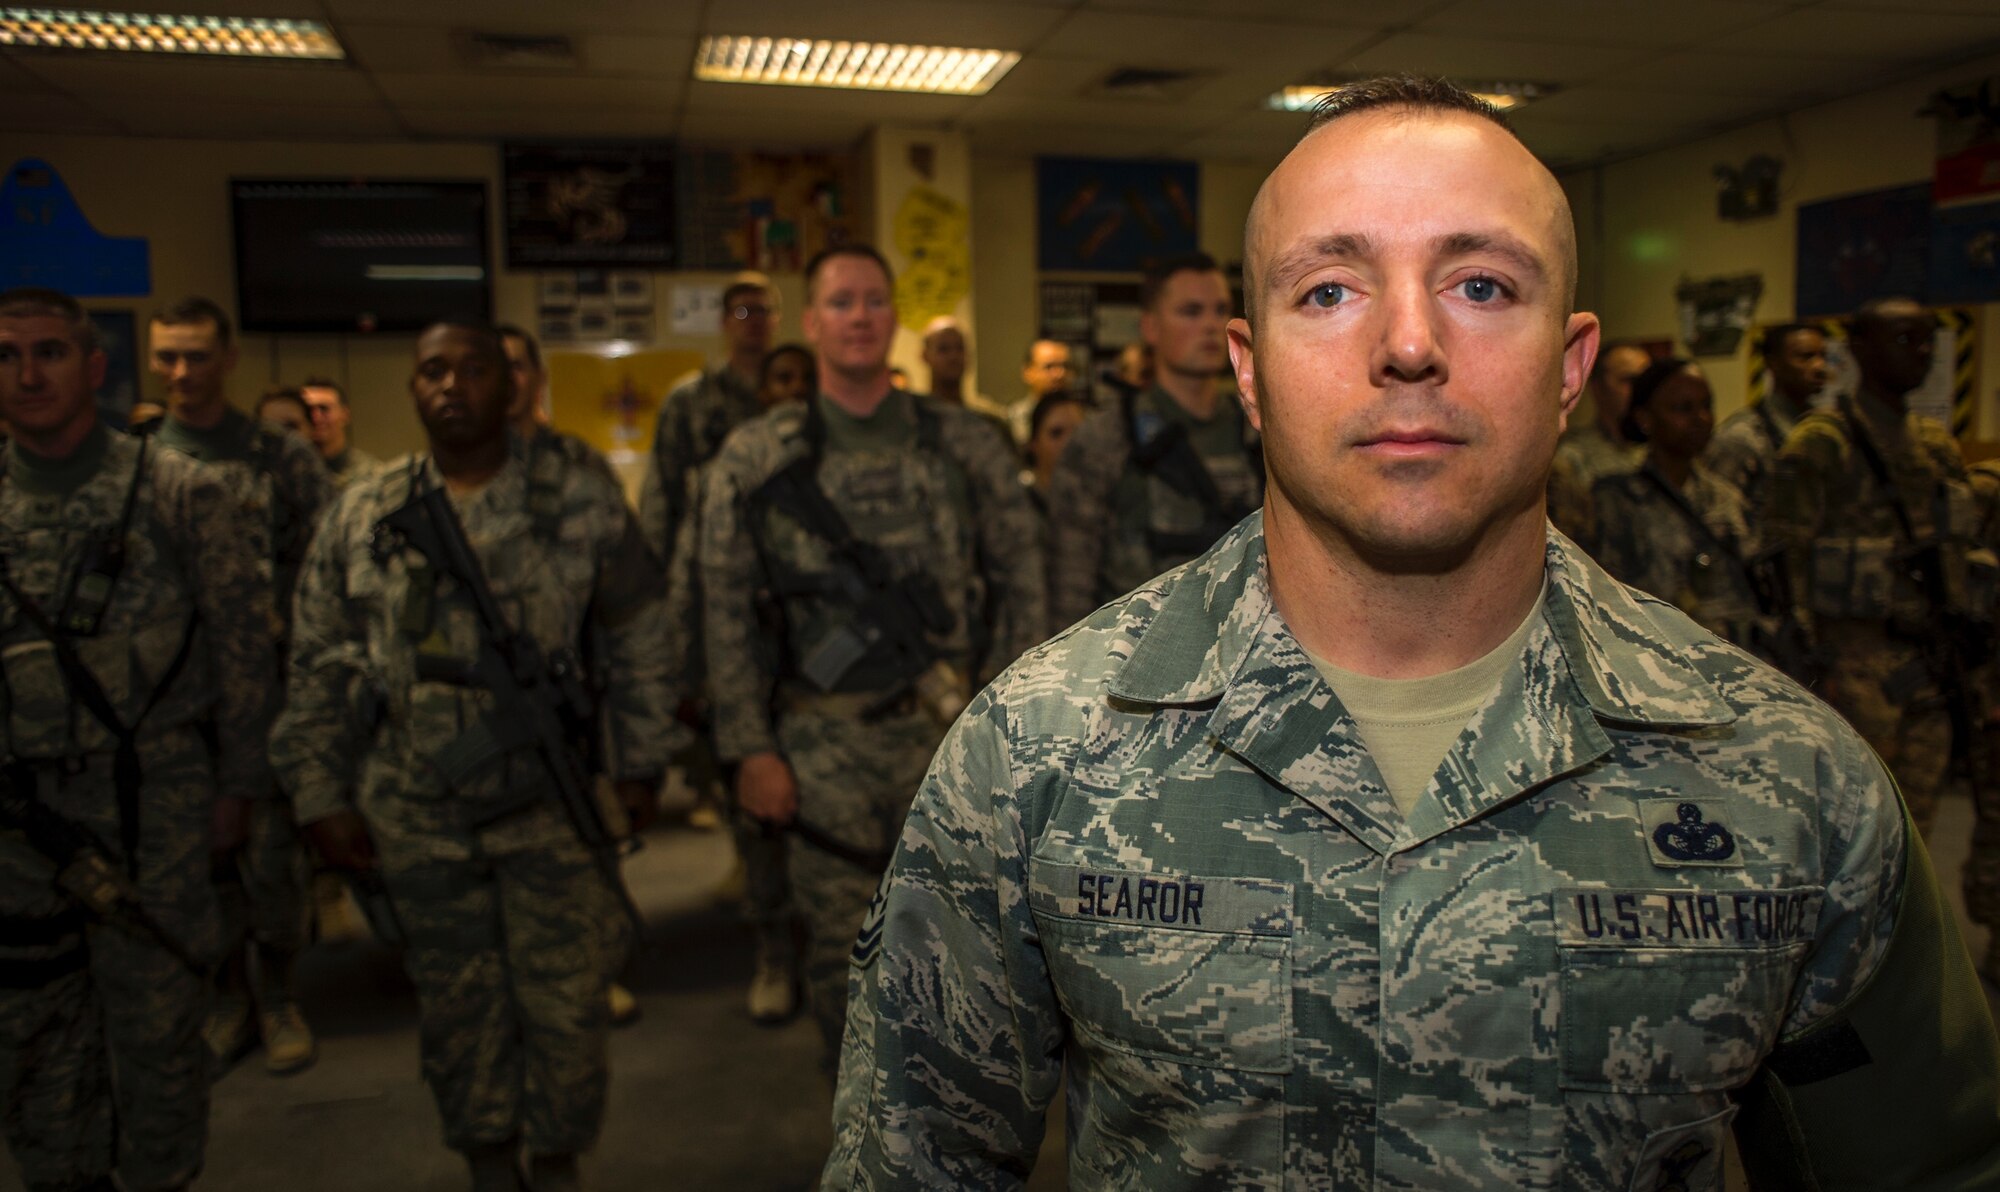 This week's Rock Solid Warrior is Master Sgt. John B. Searor III.  He is the flight chief for the 386th Expeditionary Security Forces Squadron. The Syracuse,New York native is deployed from the 721st Security Forces Squadron, Cheyenne Mt. Air Station Colorado Springs, Co.  (U.S. Air Force photo by Staff Sgt. Jeremy Bowcock)